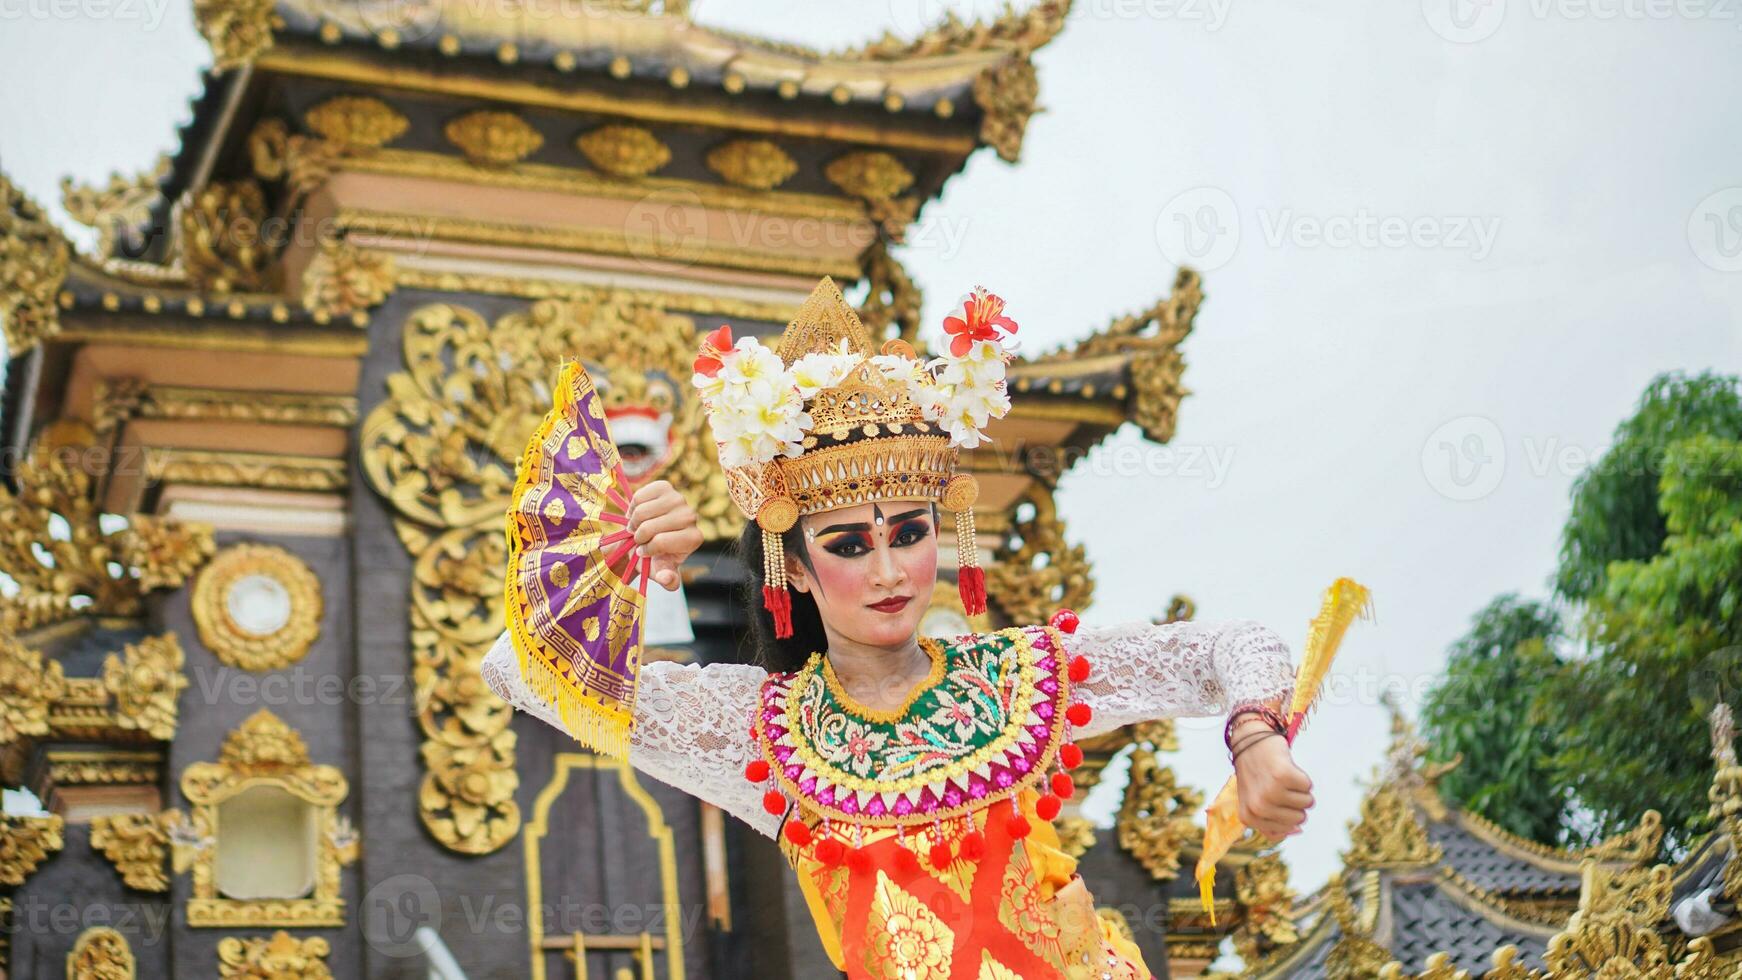 girl wearing Balinese traditional dress with a dancing gesture on Balinese temple background with hand-held fan, crown, jewelry, and gold ornament accessories. Balinese dancer woman portrait photo